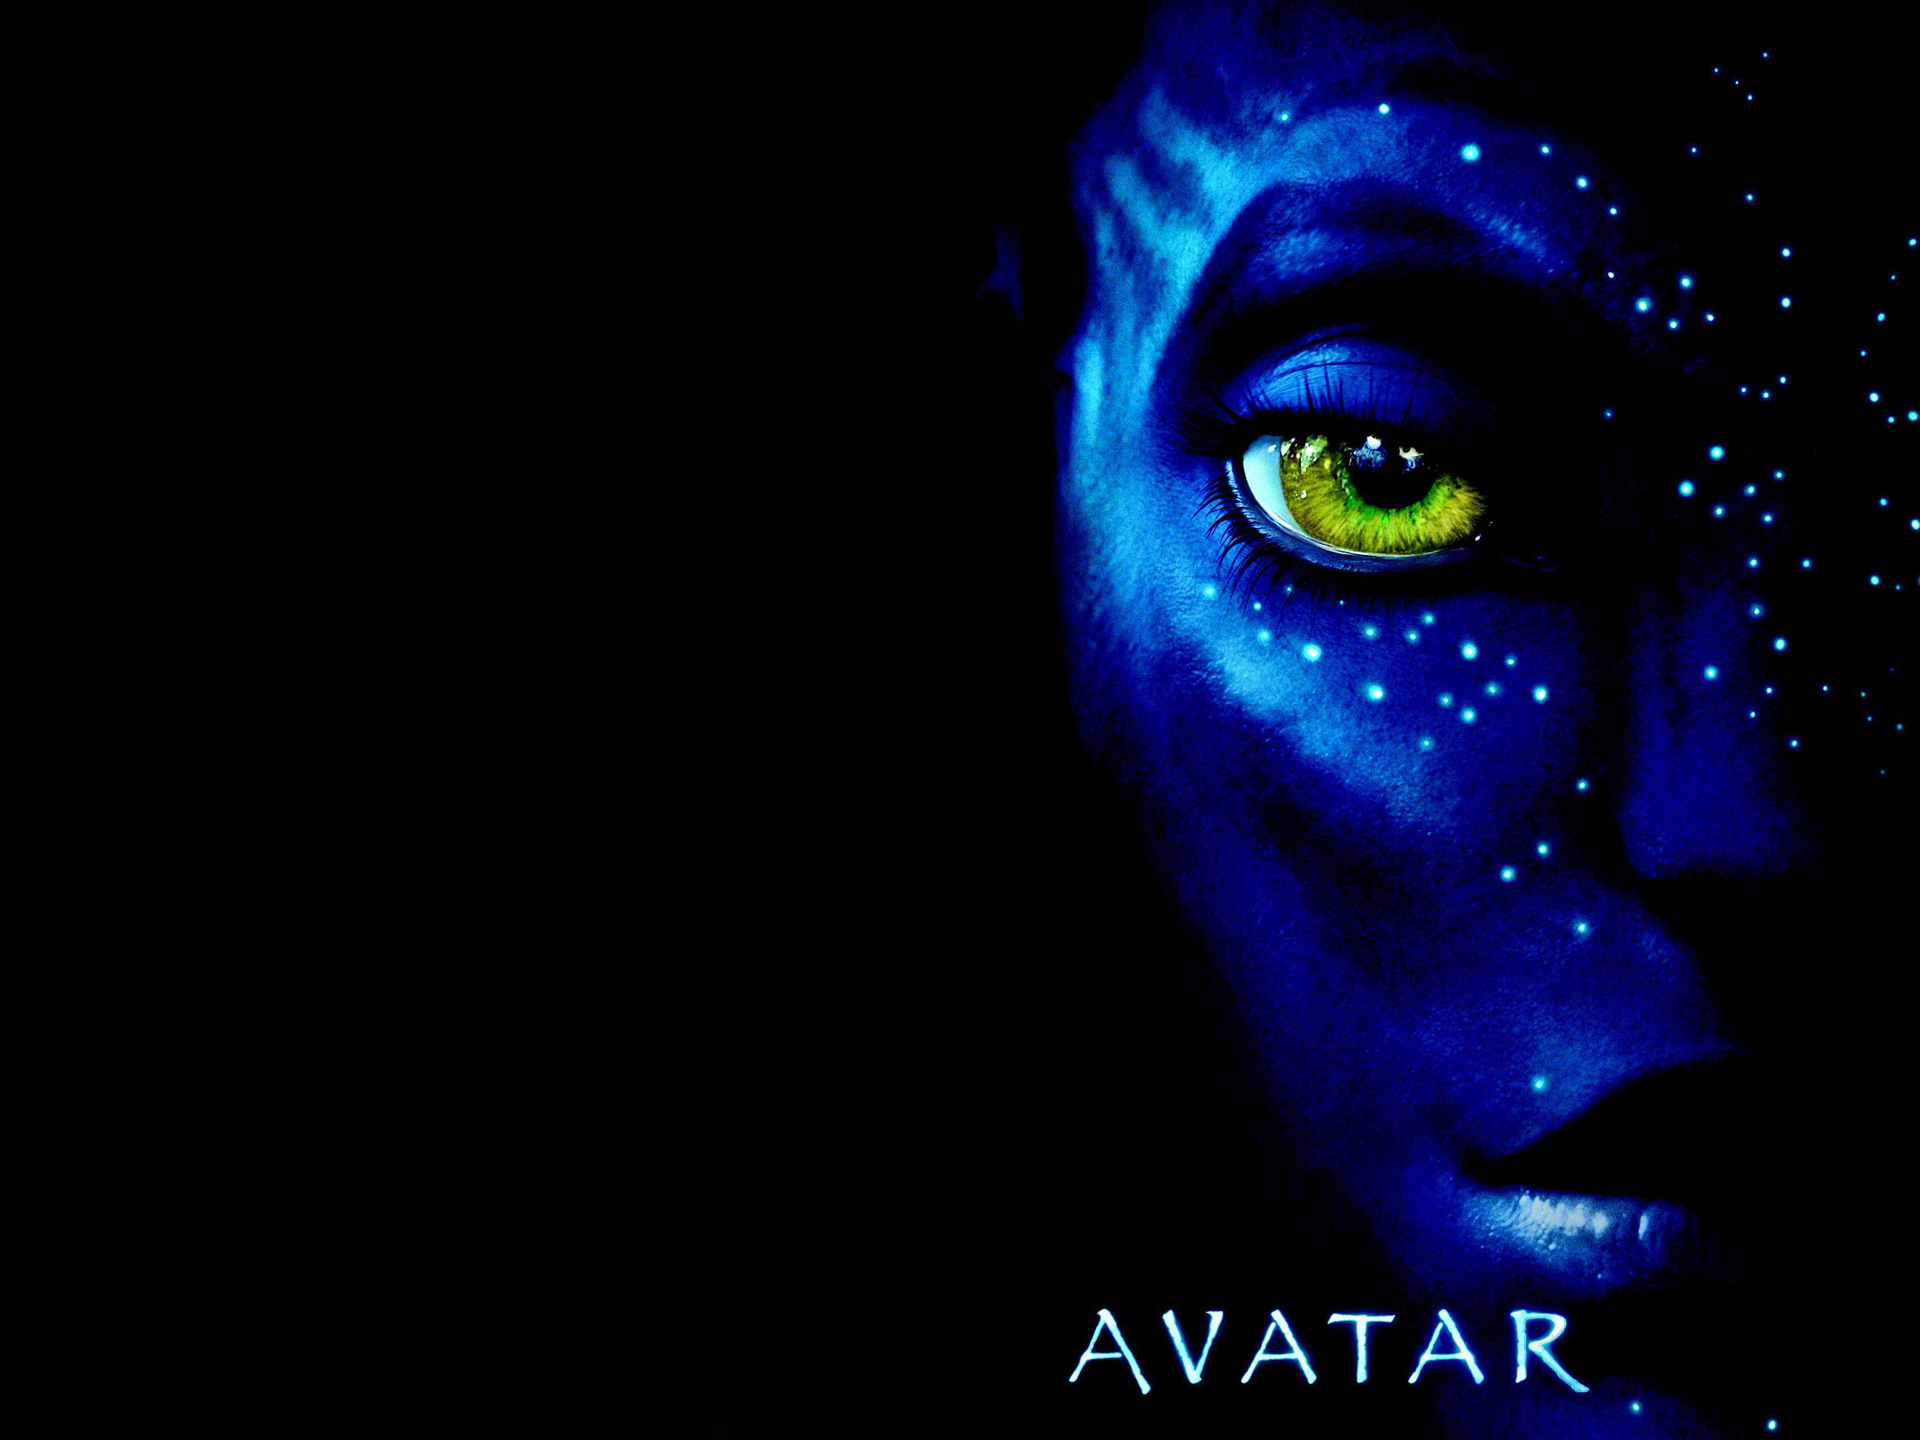 Official Avatar Movie Poster Wallpapers HD Wallpapers 1920x1440